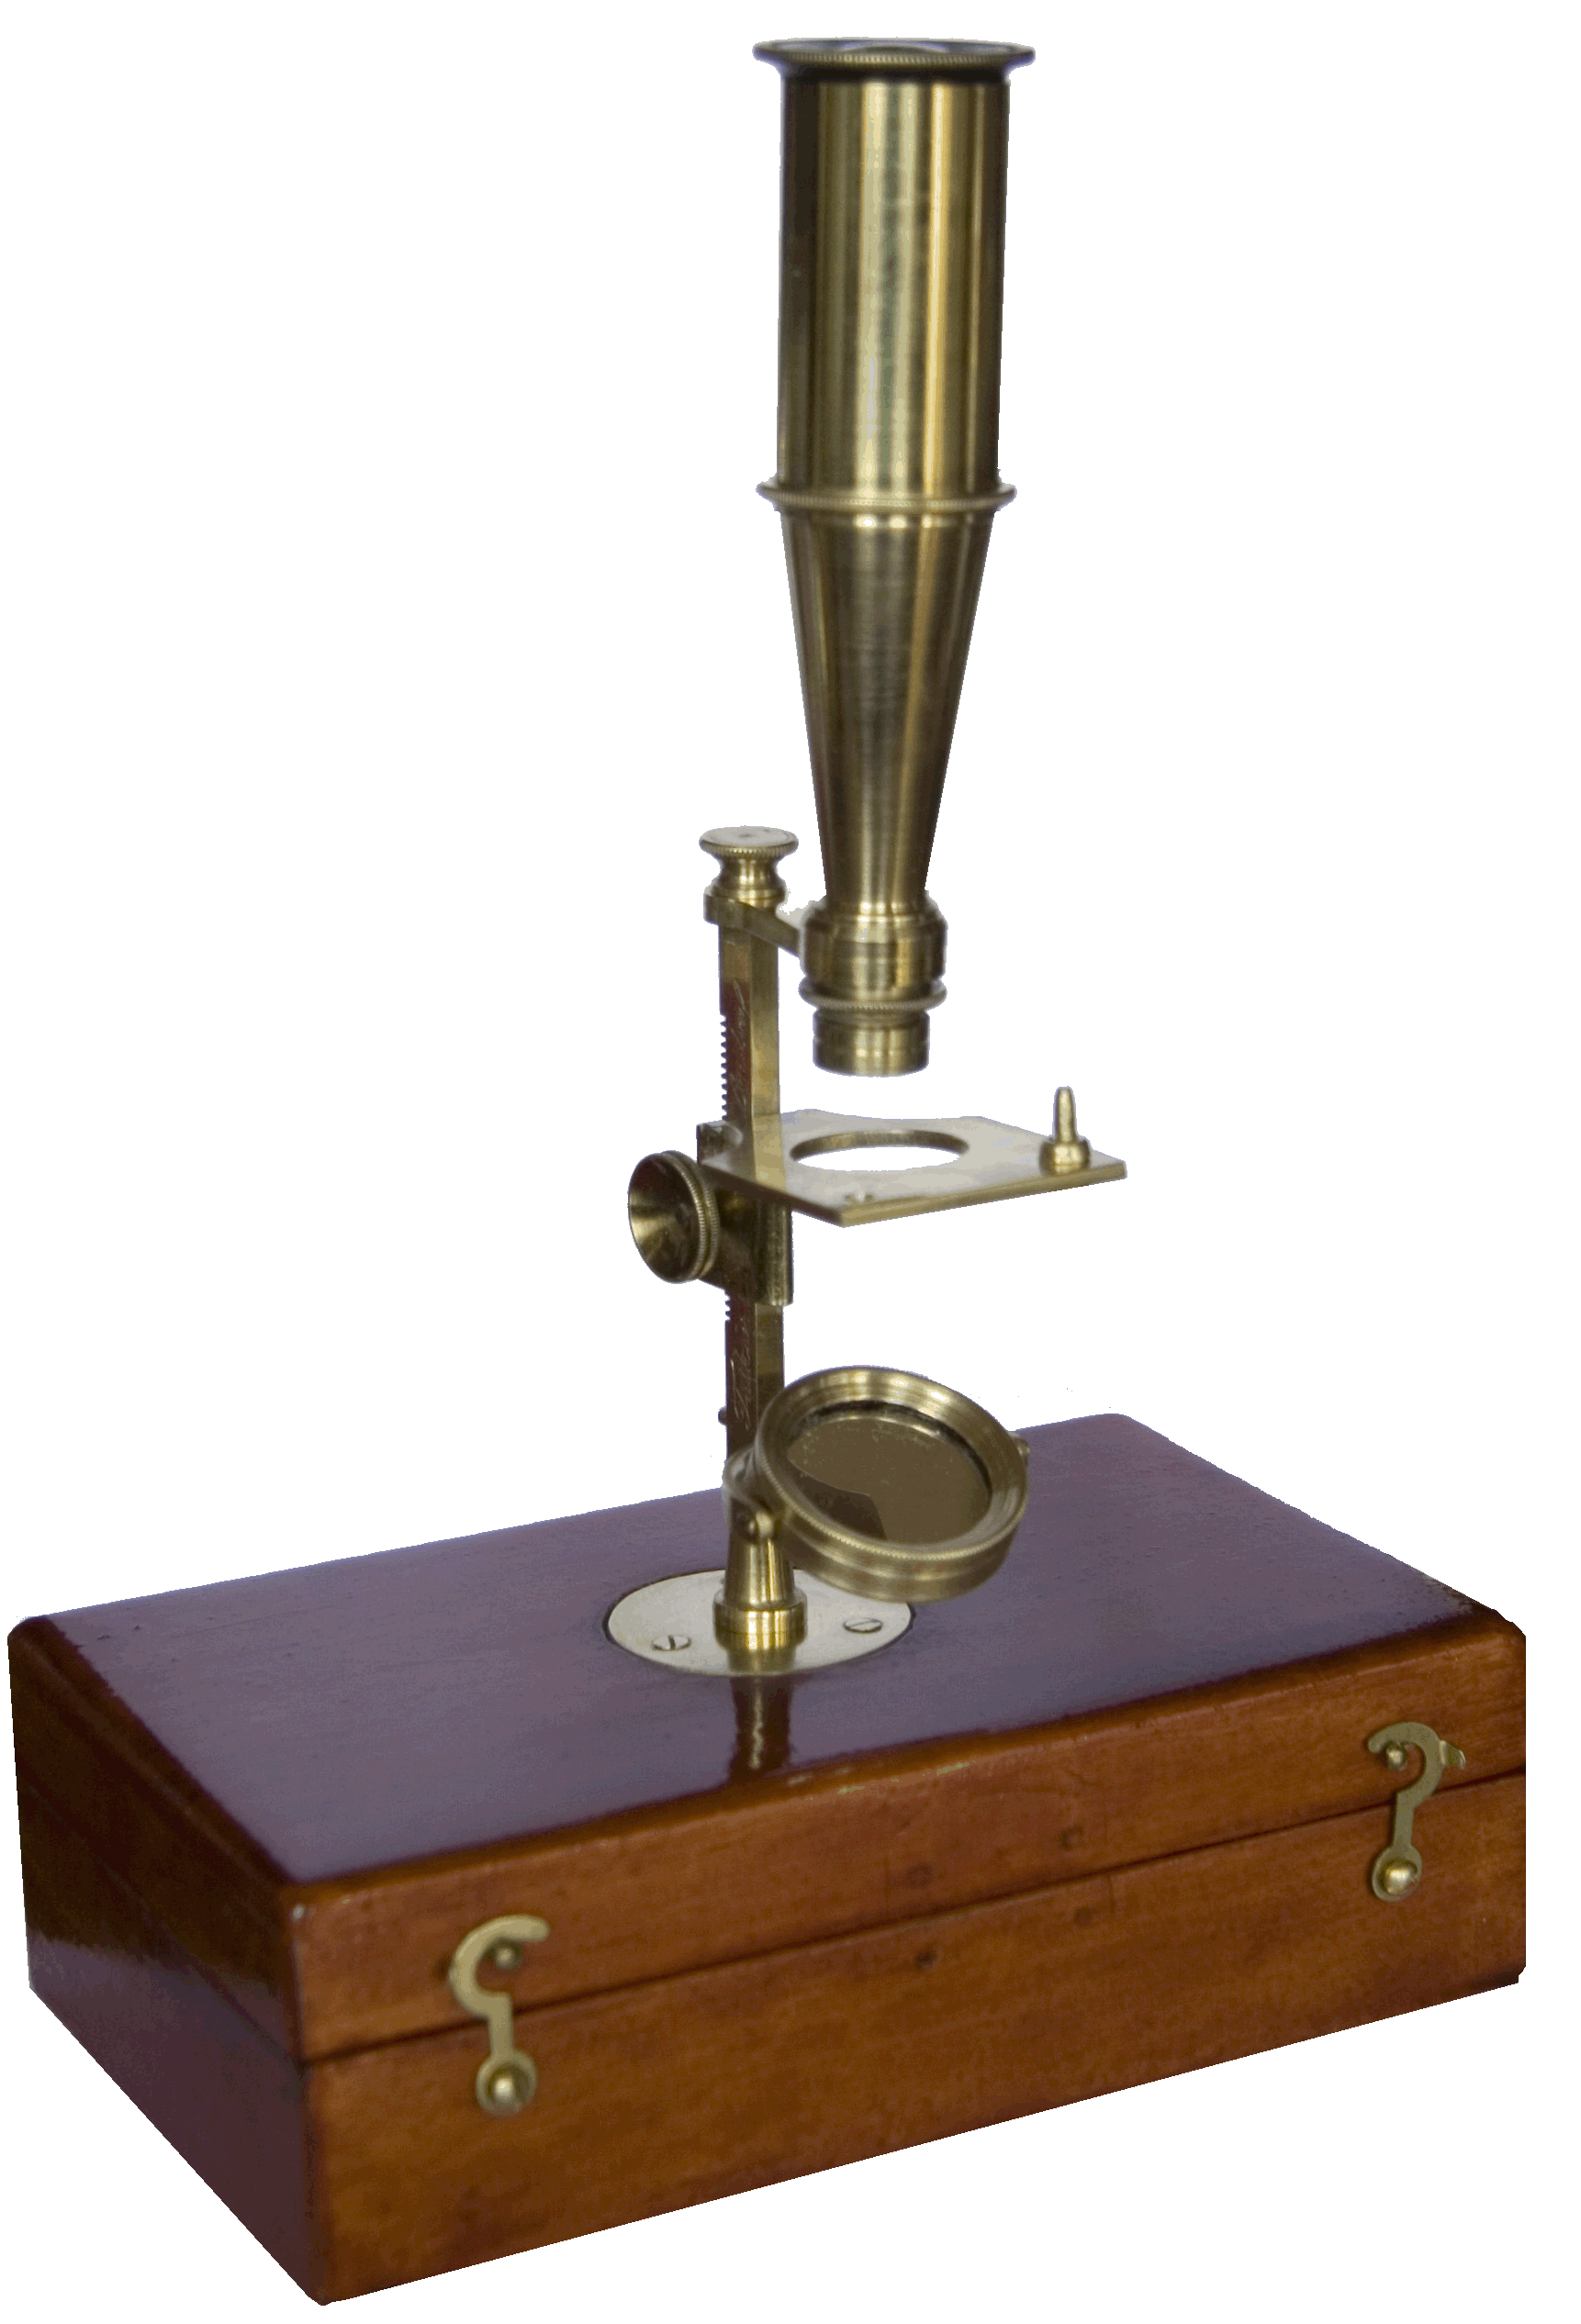 Tuther microscope